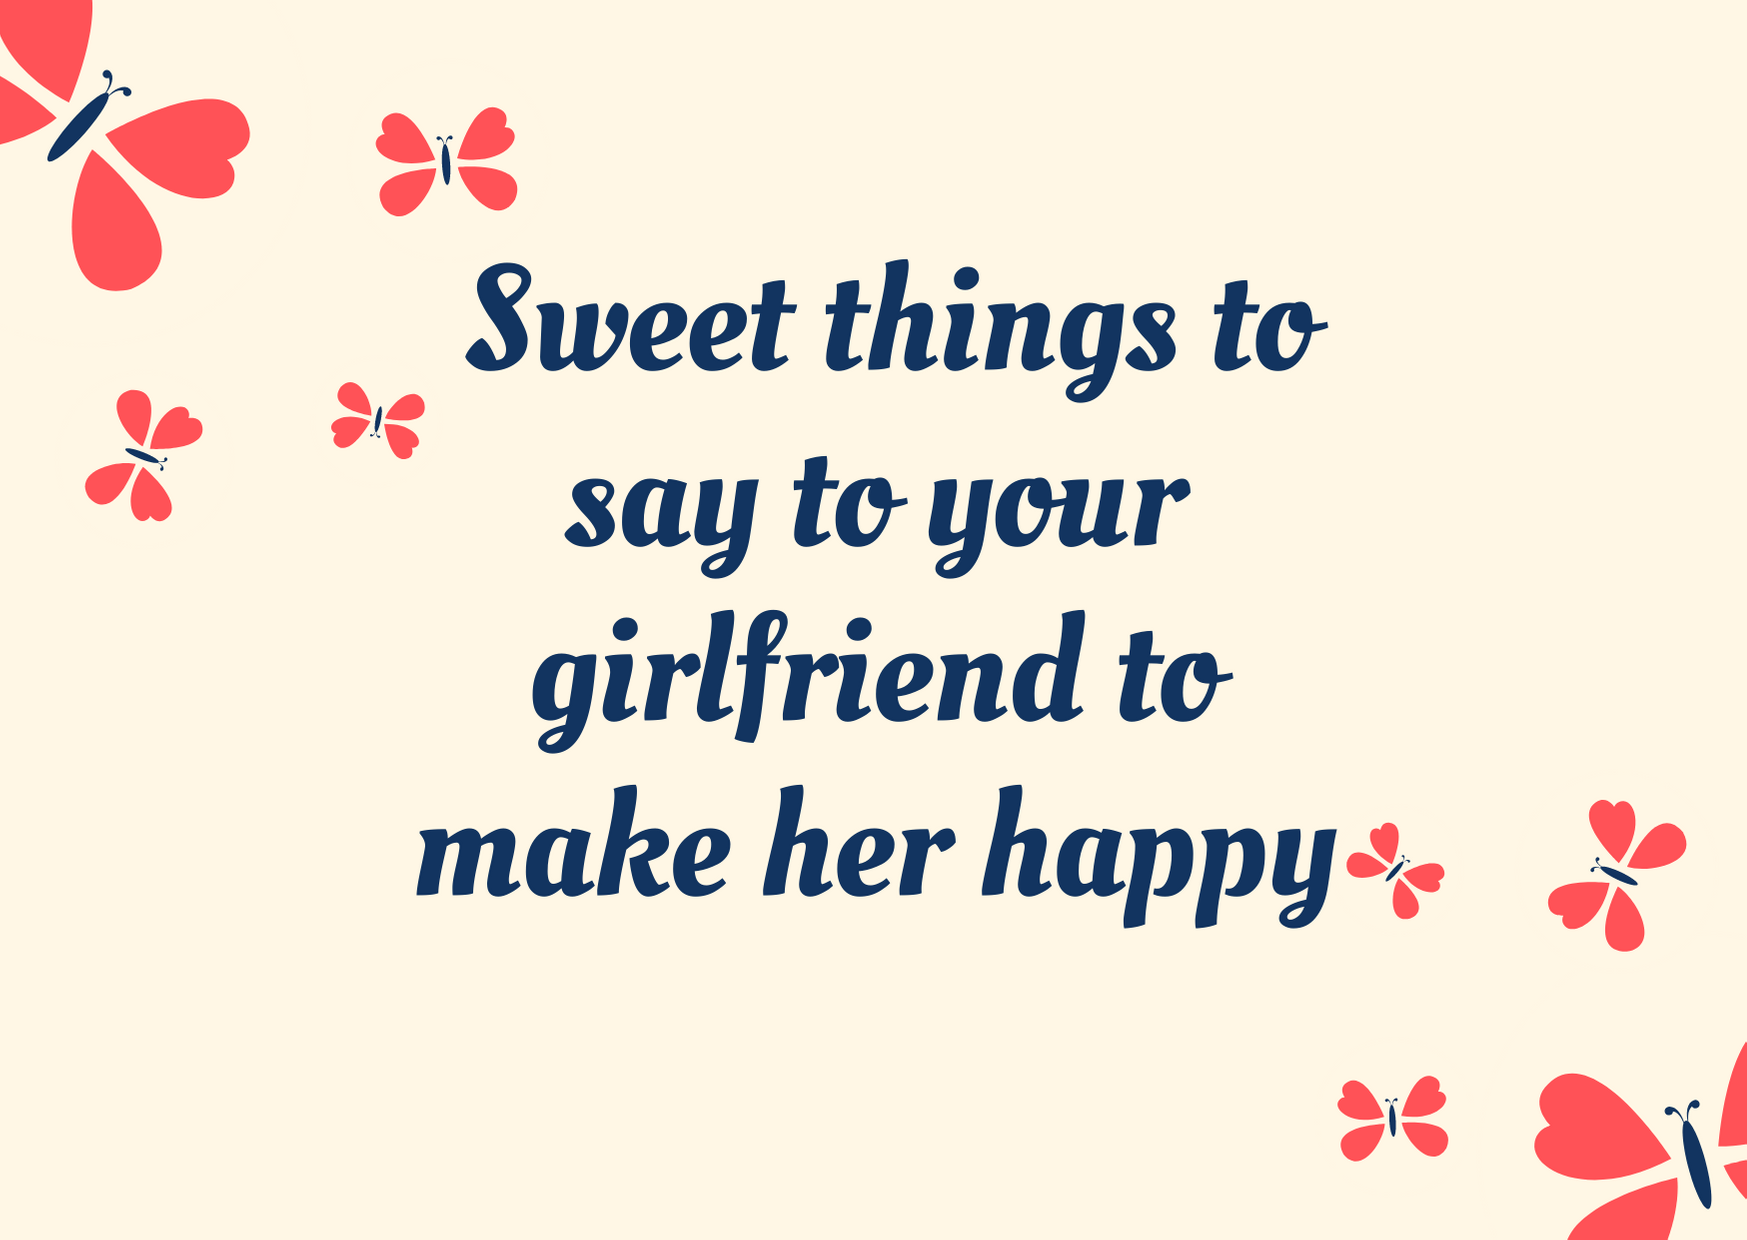 Get Cute Things Your Girlfriend Will Love Gif